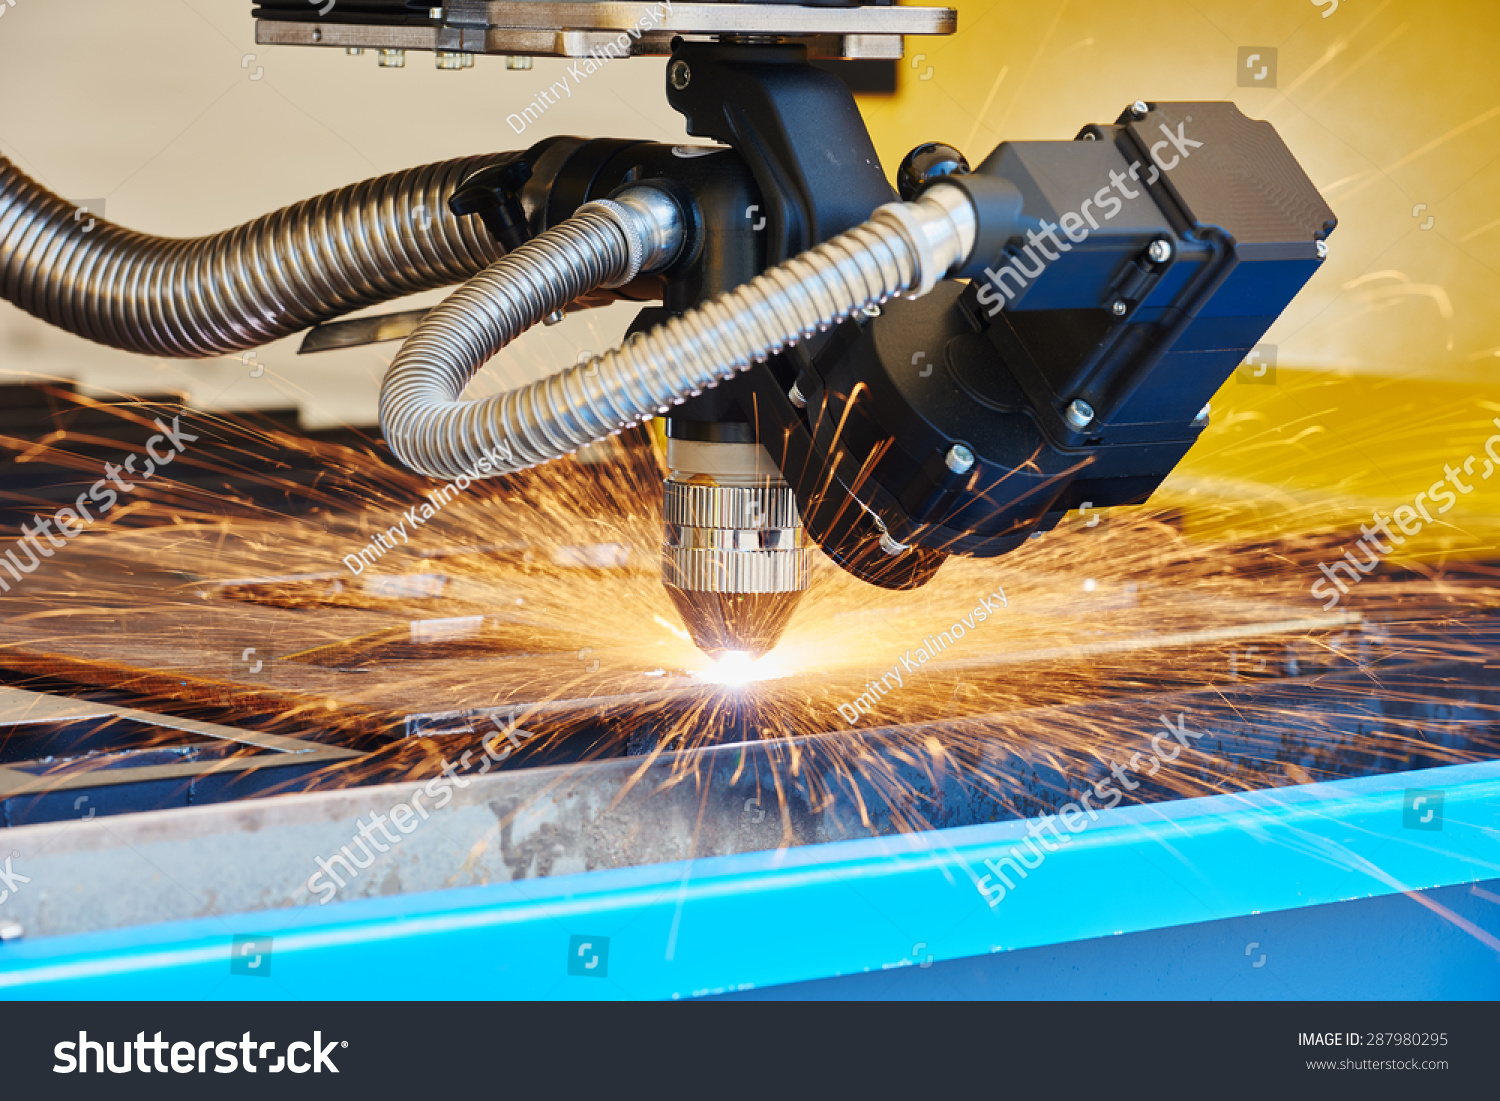 metal working. Plasma or Laser cutting technology of flat sheet metal steel material with sparks #287980295